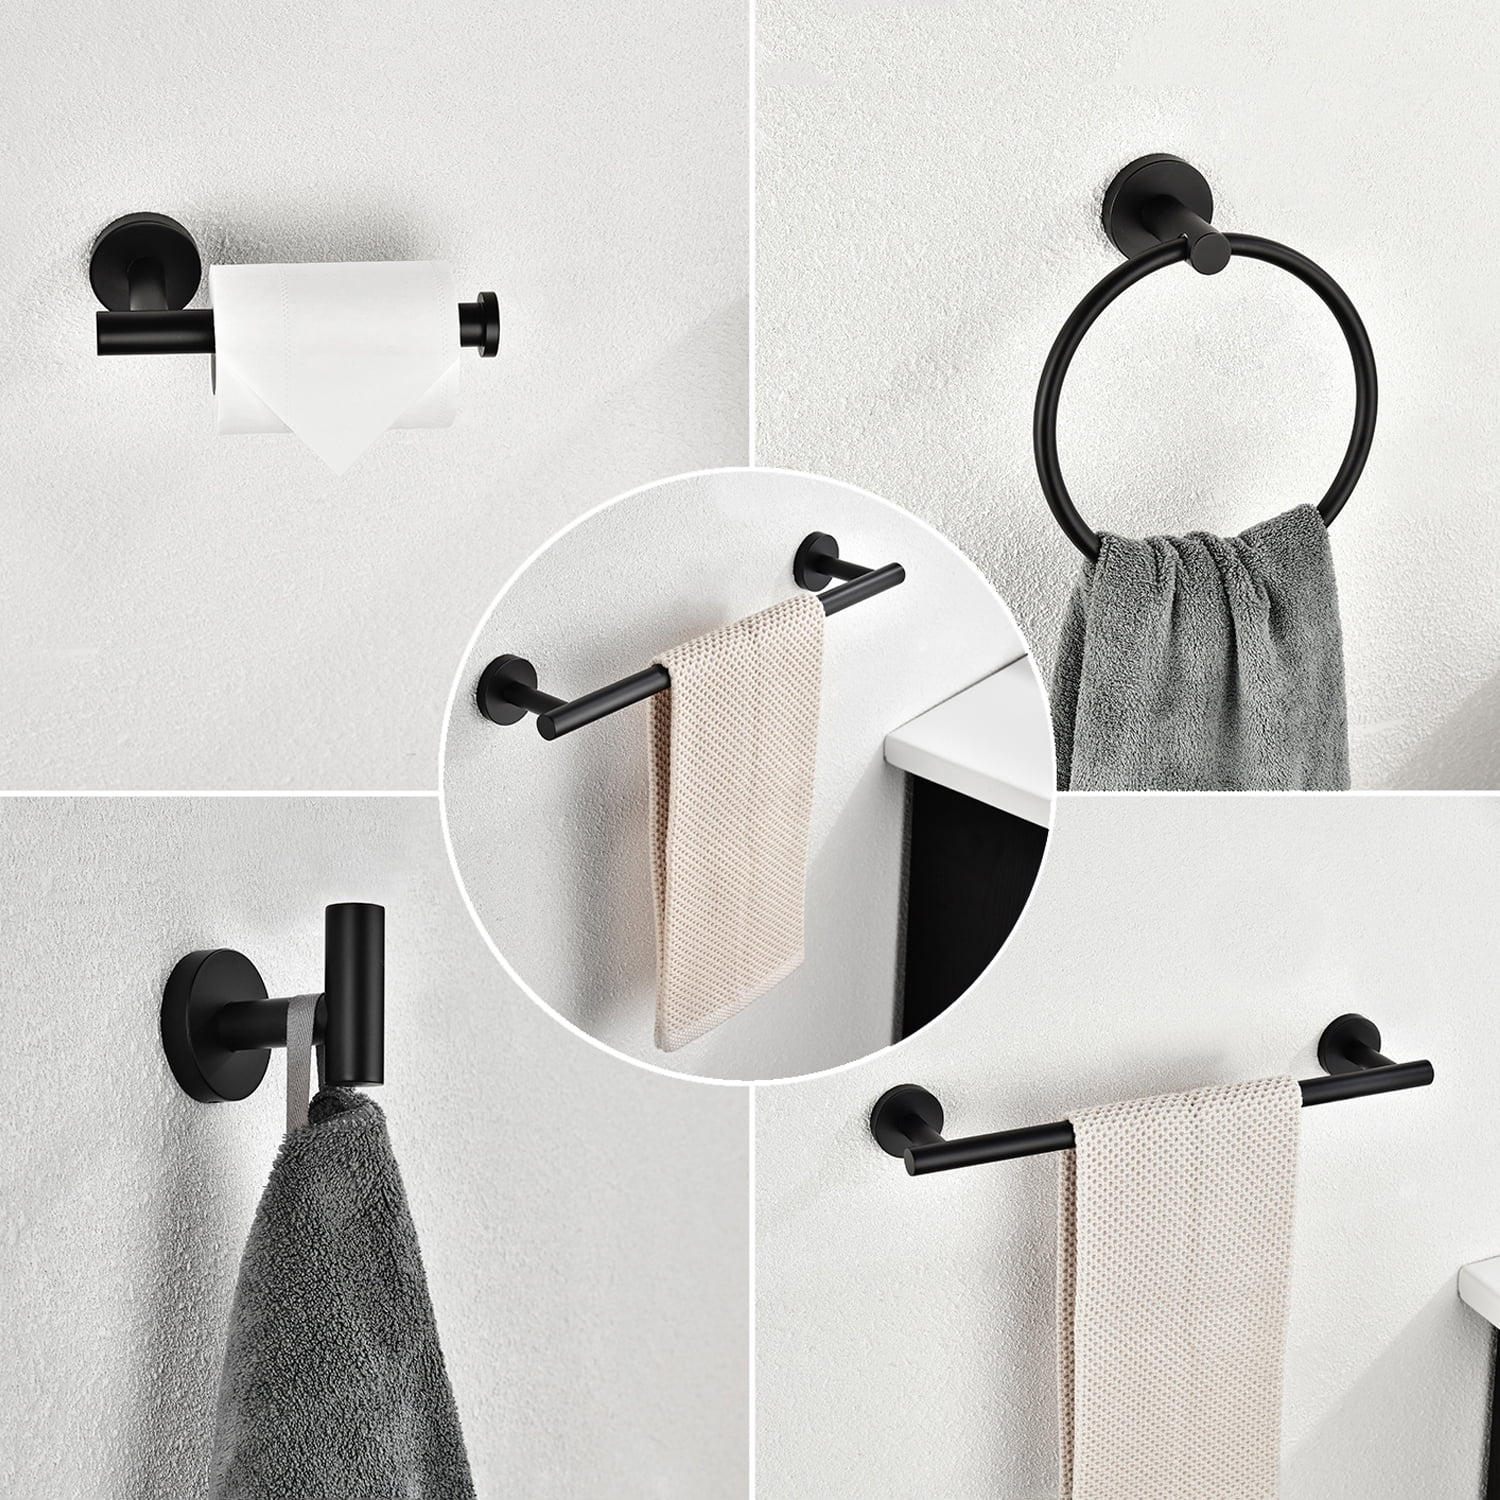 Details about   Stainless Steel Bathroom Hardware Towel Bar Paper Holder Rack Accessories Supply 